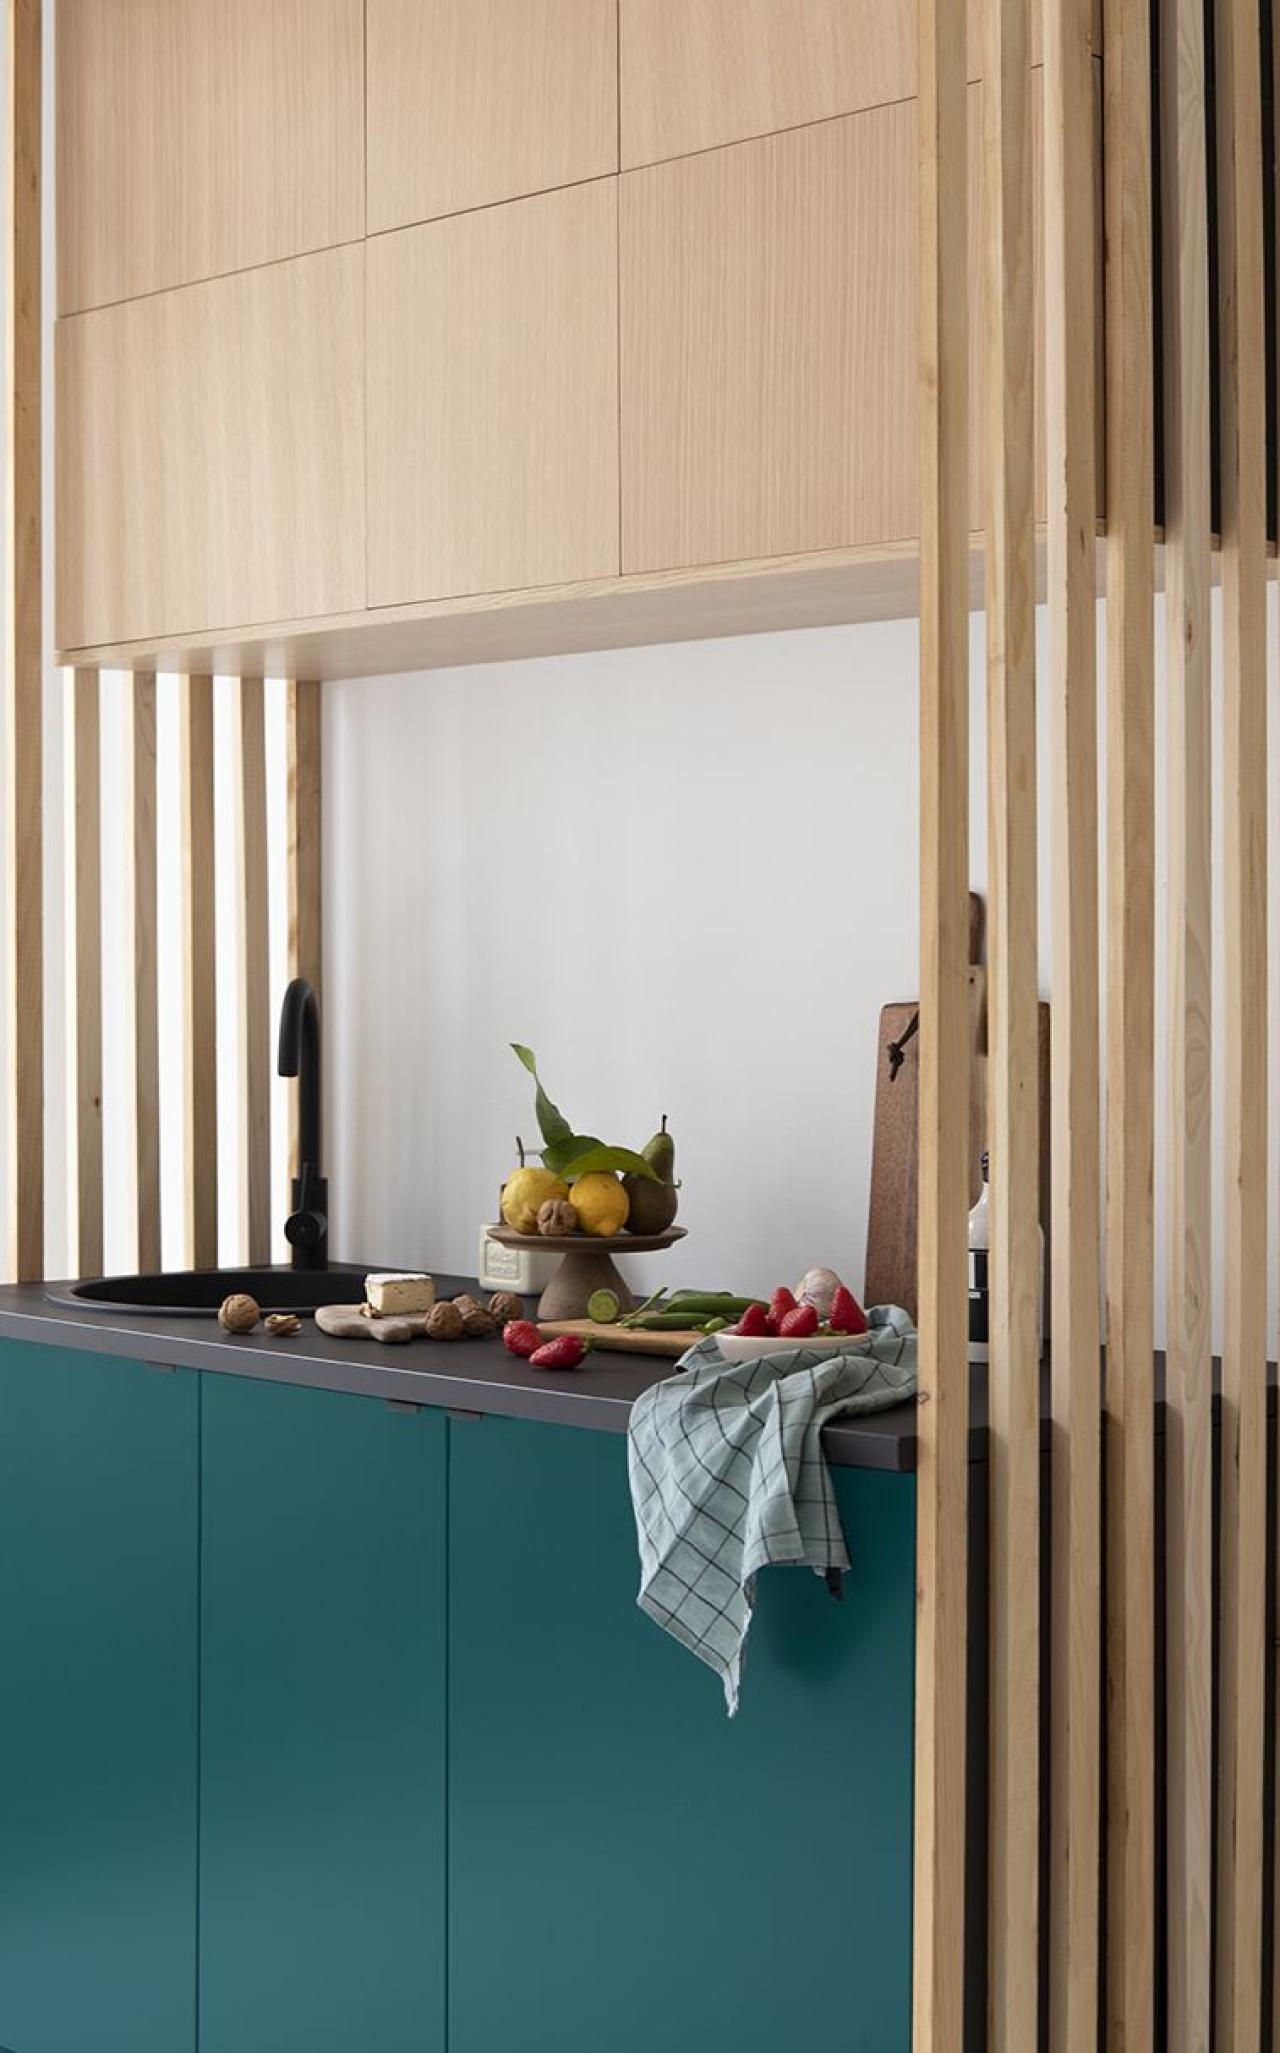 Kitchenette in natural Oak and Green 04 - Sauvage framed by claustra